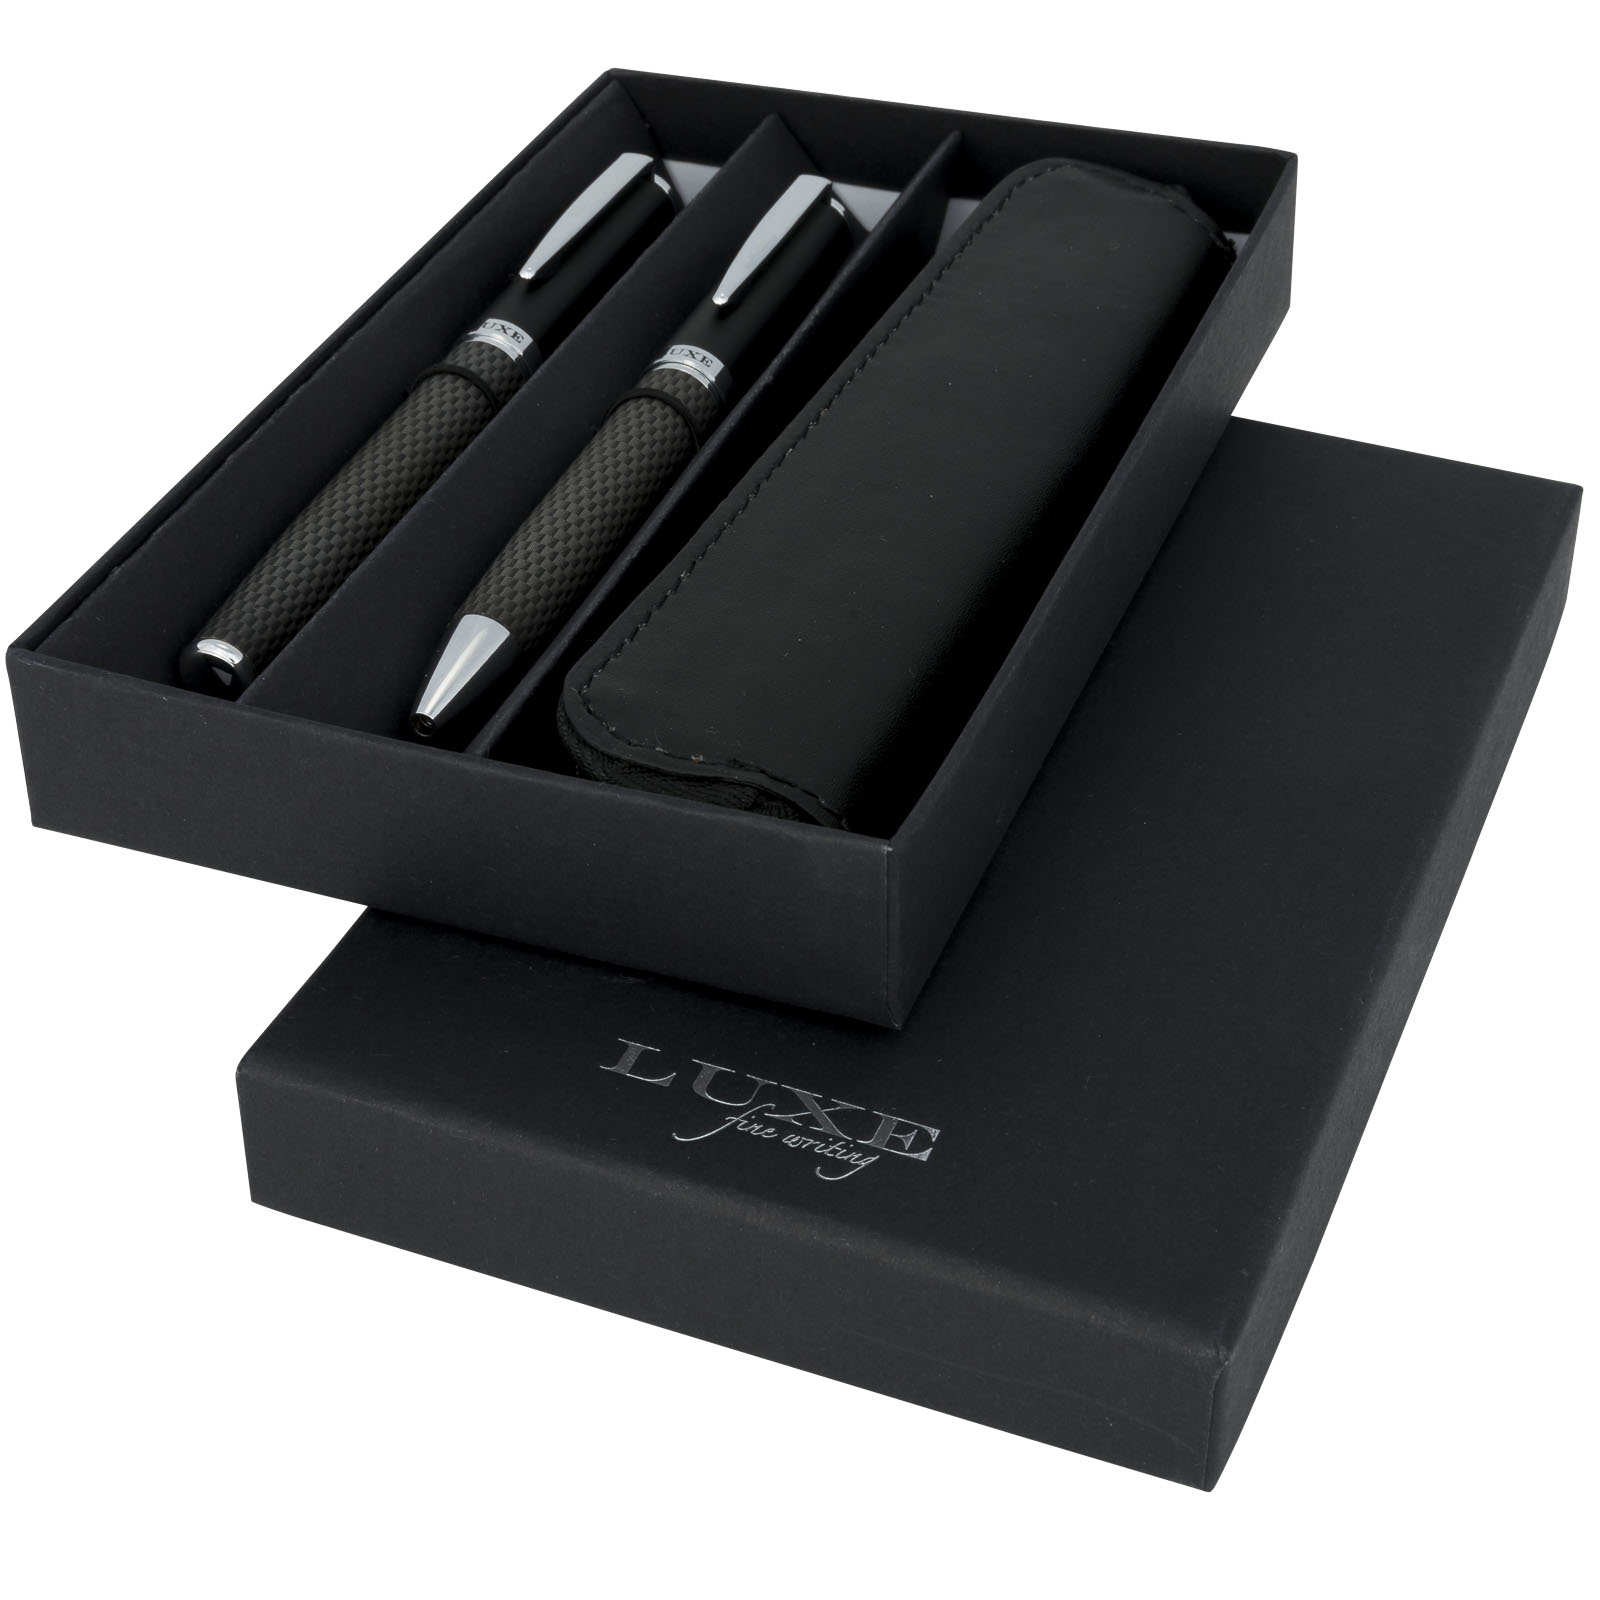 Pens & Writing - Carbon duo pen gift set with pouch